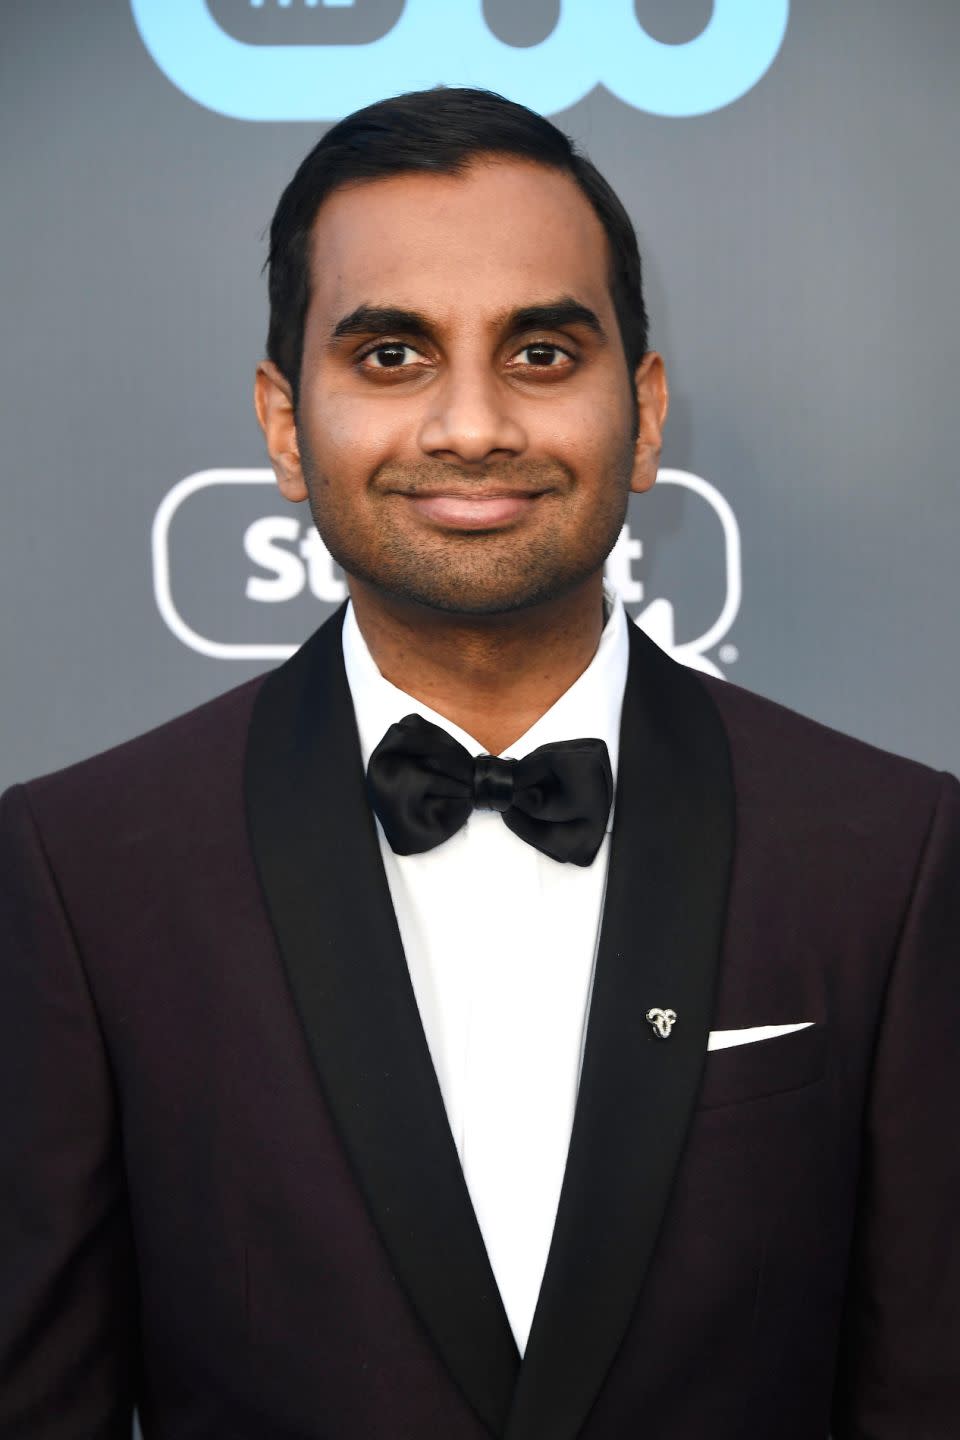 The anonymous woman made her discomfort known to Ansari in a text message she sent him after their date. The comedian is pictured here at the Critics' Choice Awards. Source: Getty